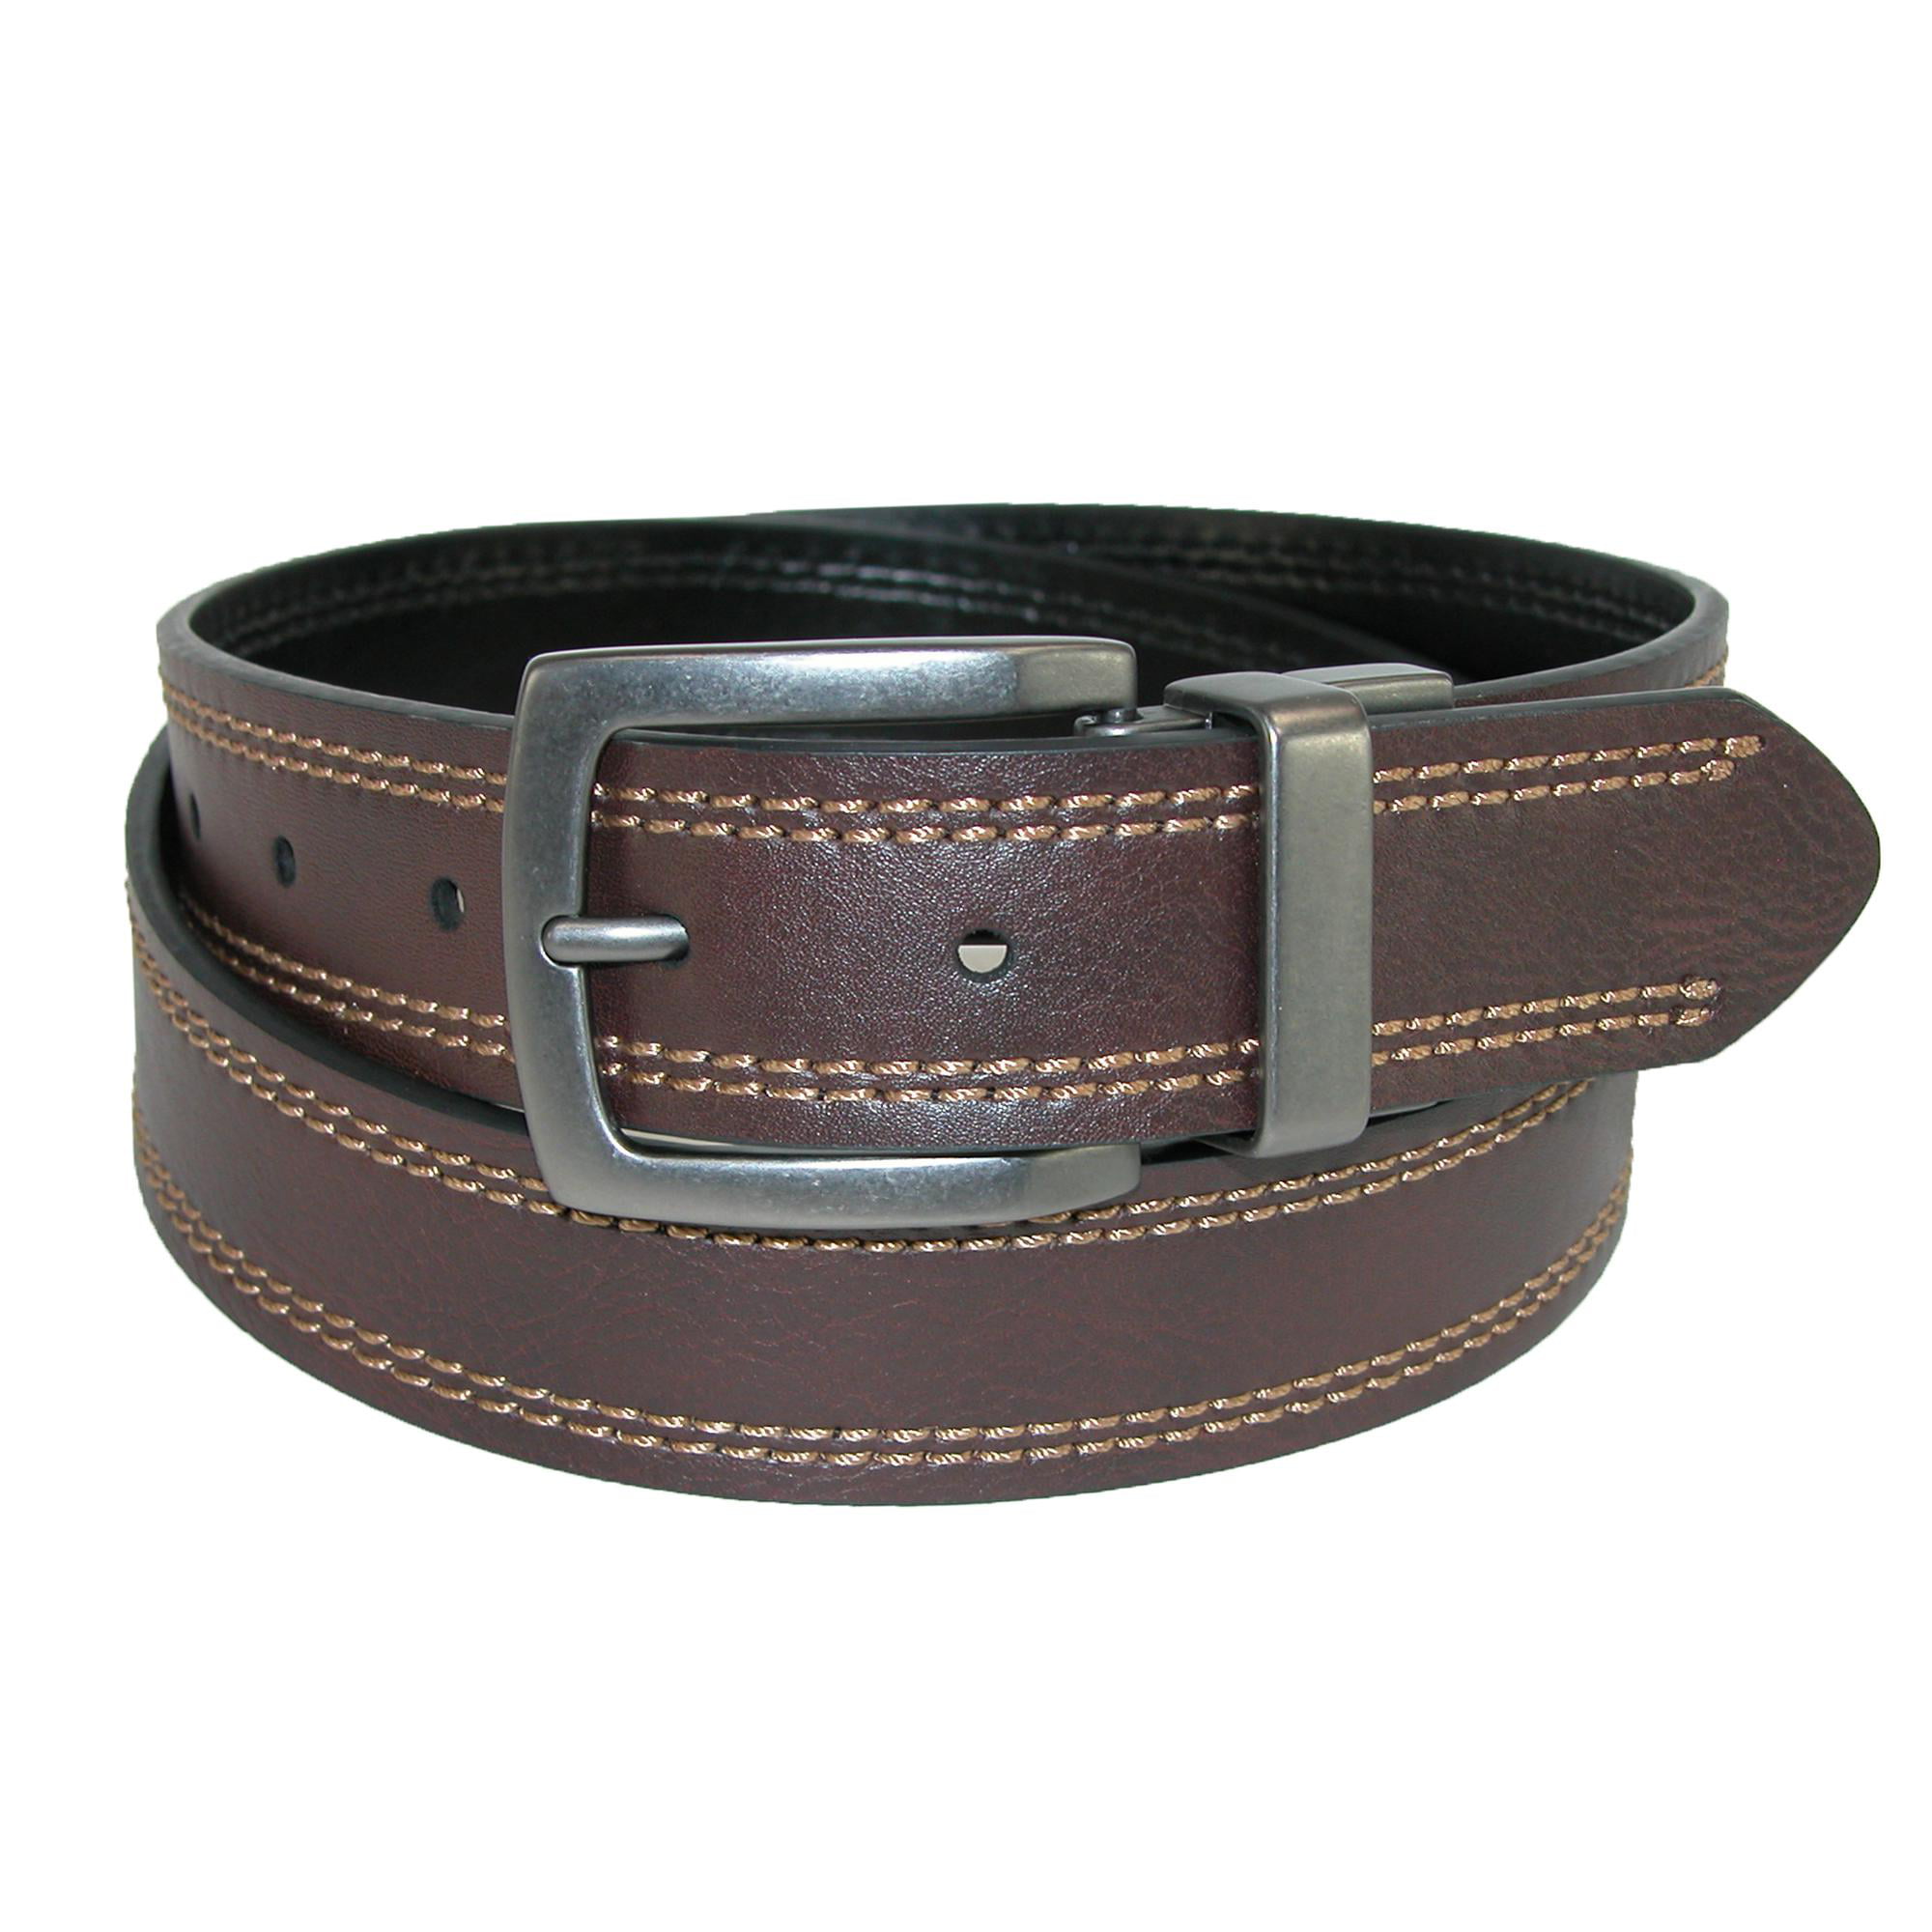 Dickies Men's 35mm Reversible Belt with Contrast Stitch